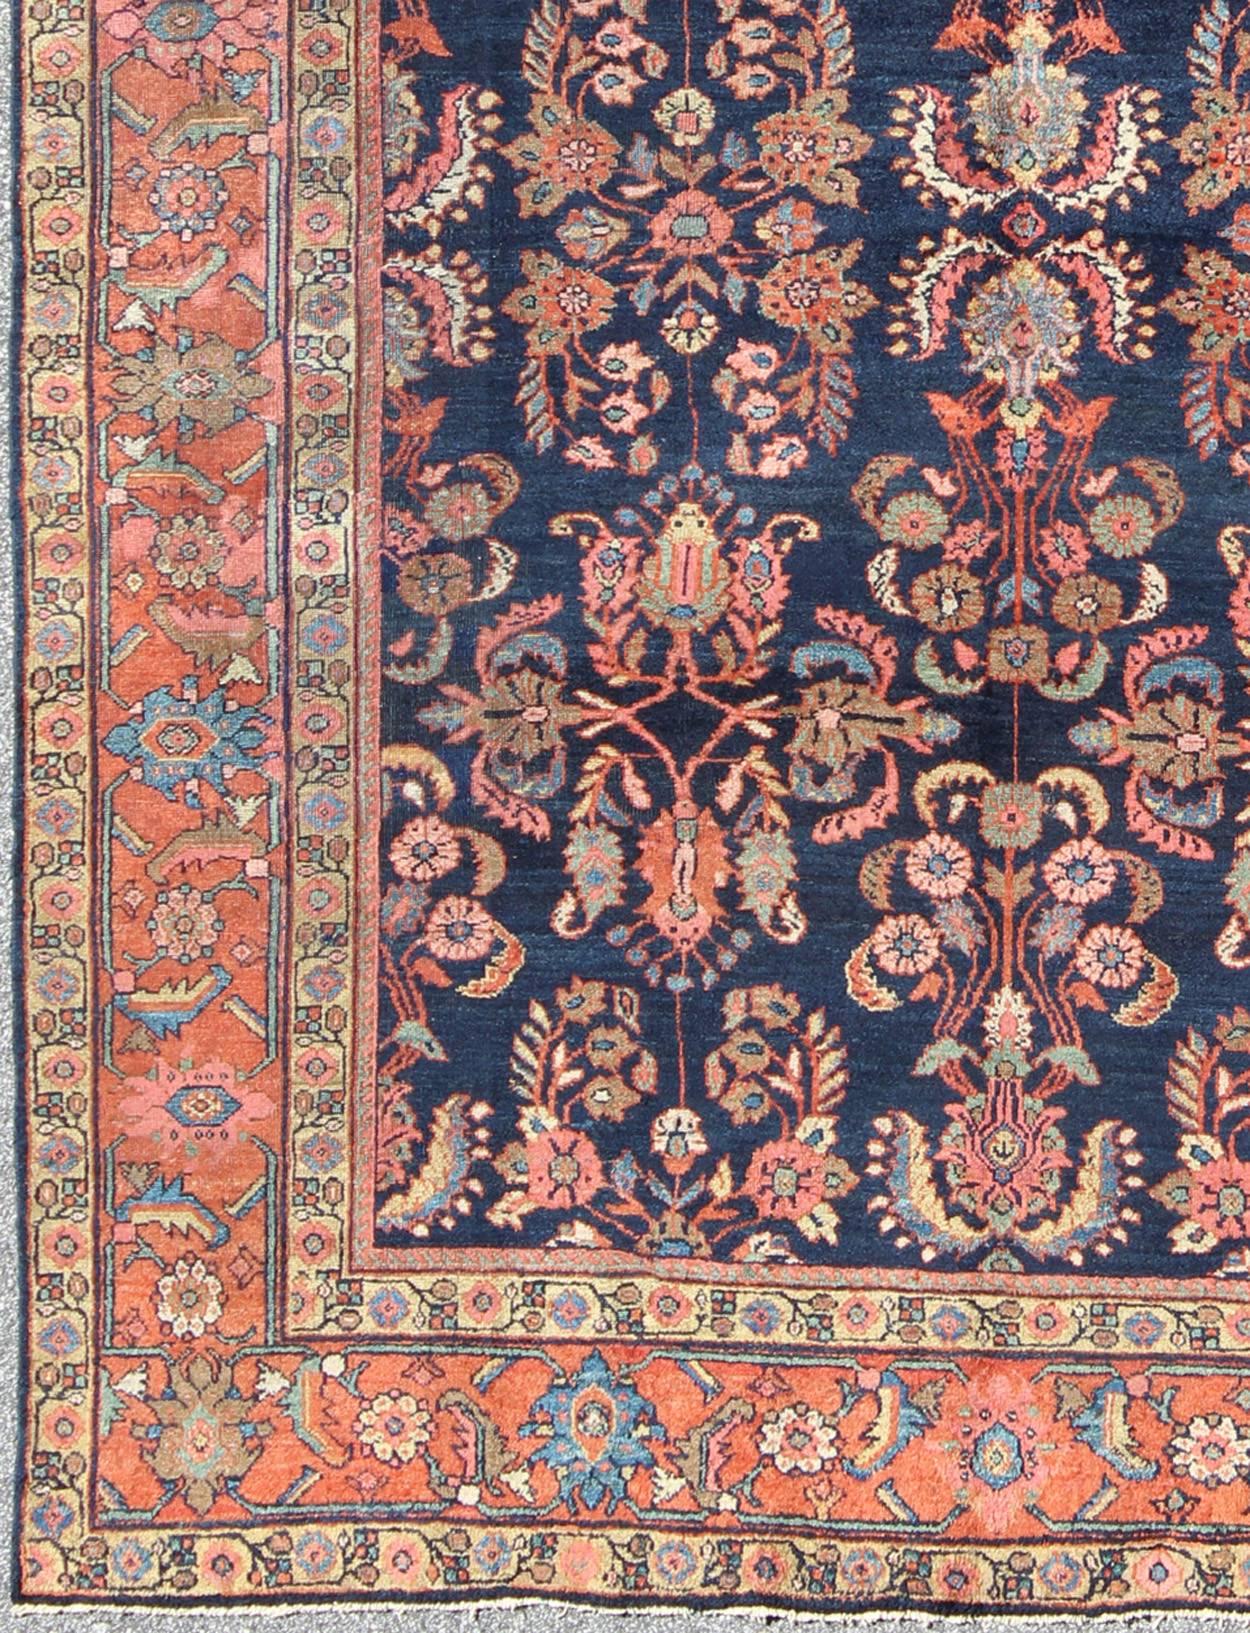 Antique Mahal with Floral design. Keivan Woven Arts / rug CAM-B59, country of origin / type: Iran / Mahal/Sultanabad , circa 1920.

Measures: 8 x 11'0.      

This Mahal relies heavily on exquisite details as well as large-scale flowers and